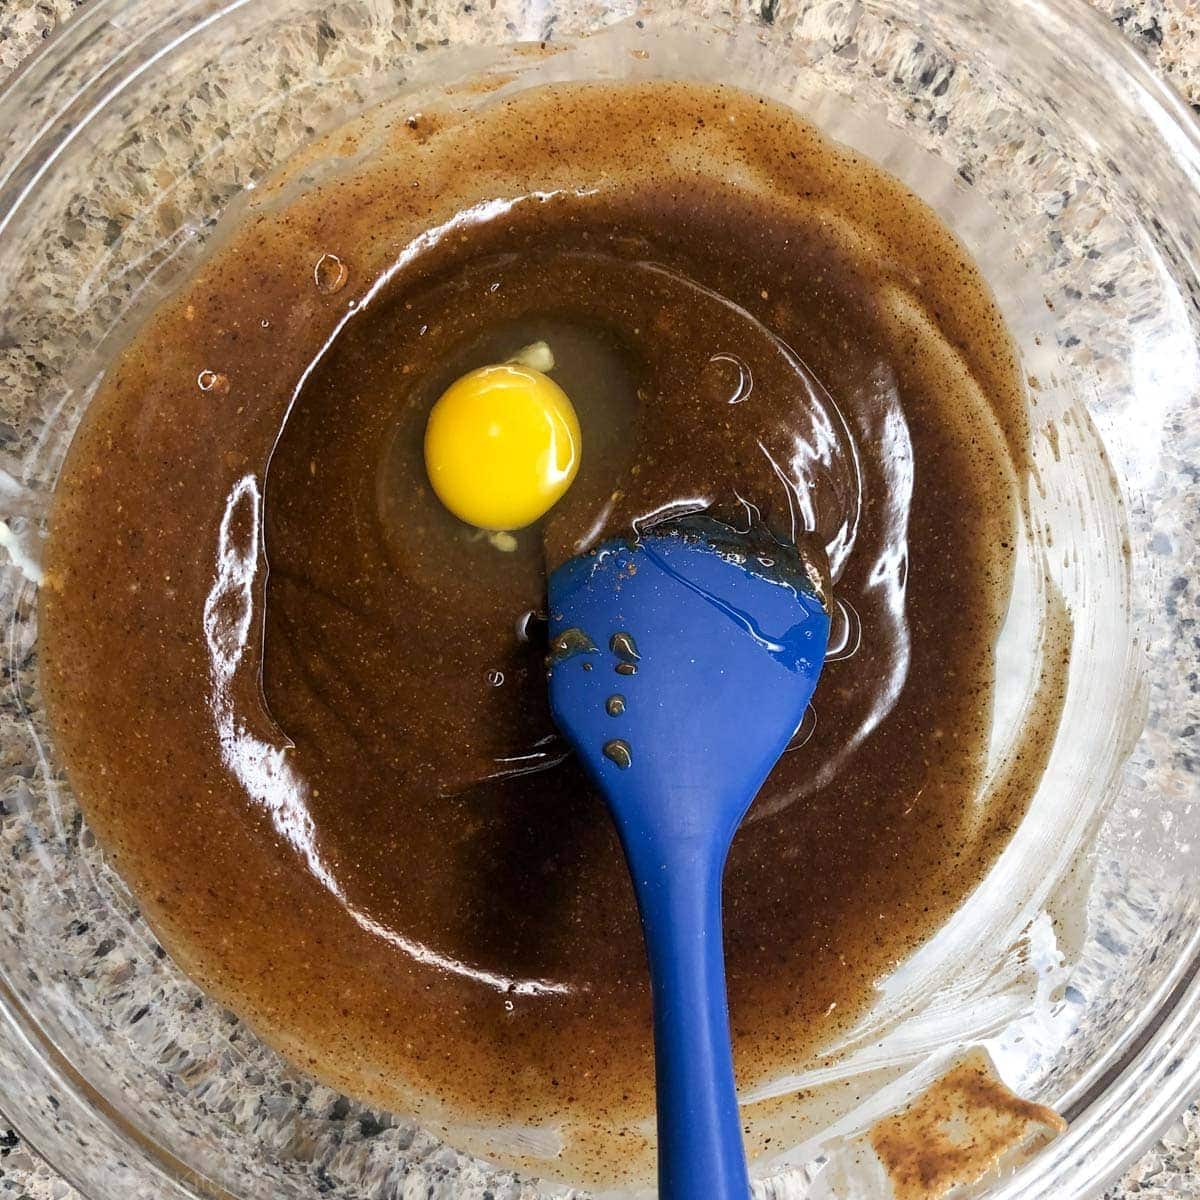 Egg in a mixing bowl.